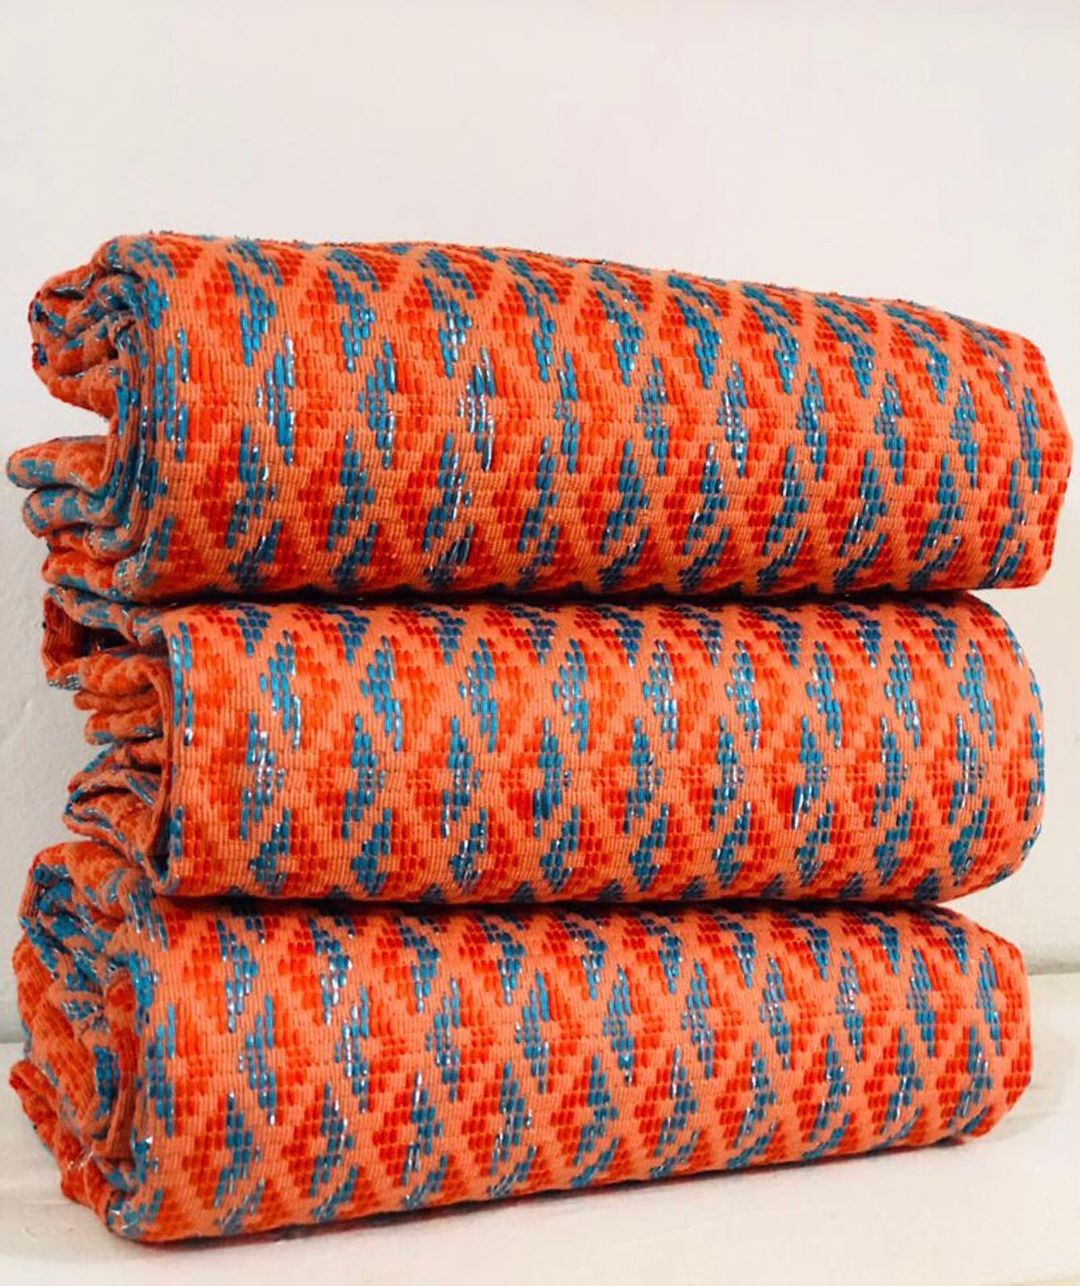 Authentic Hand Weaved Kente Cloth A2332